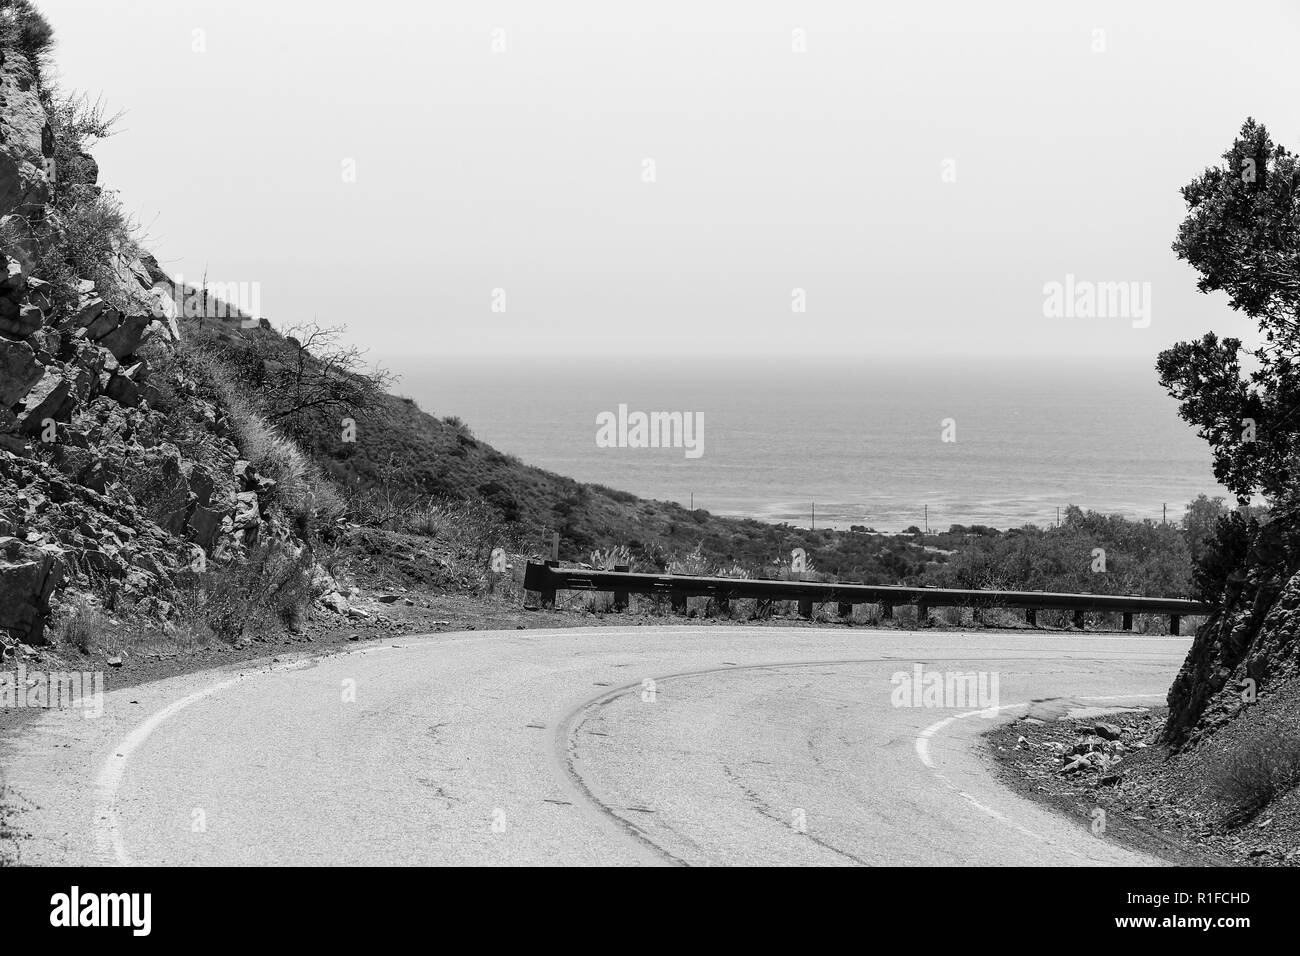 A curve on the Mulholland Highway in the Malibu Hills. In the background is the Pacific Ocean. Captured in black and white. Stock Photo